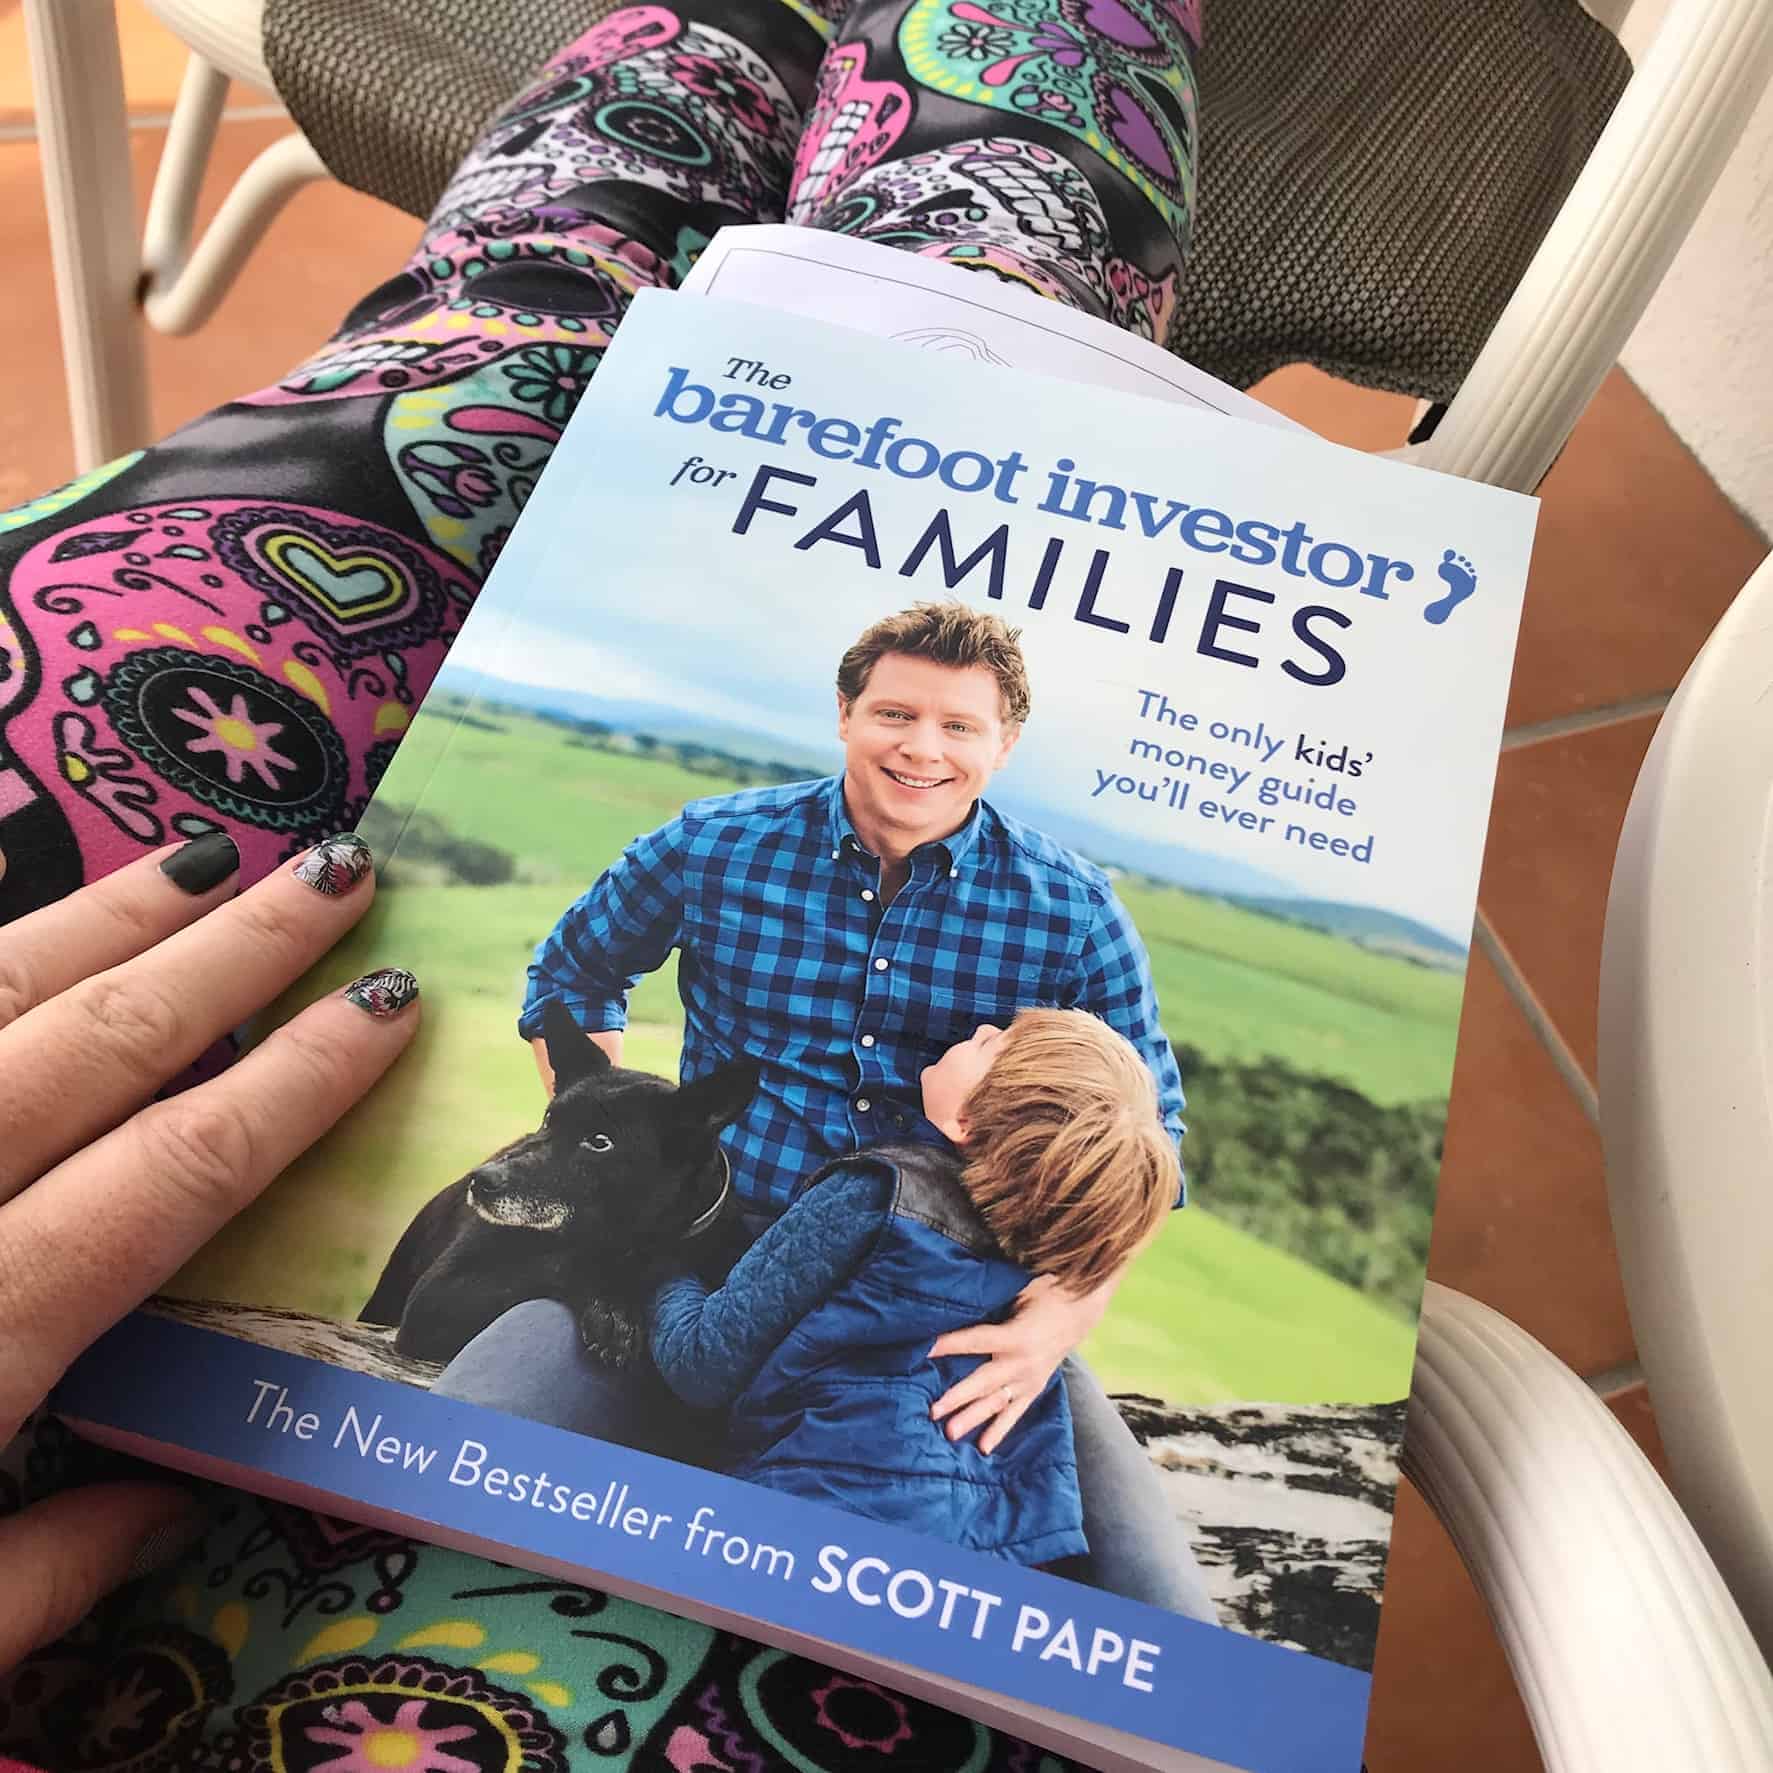 The barefoot investor for families book